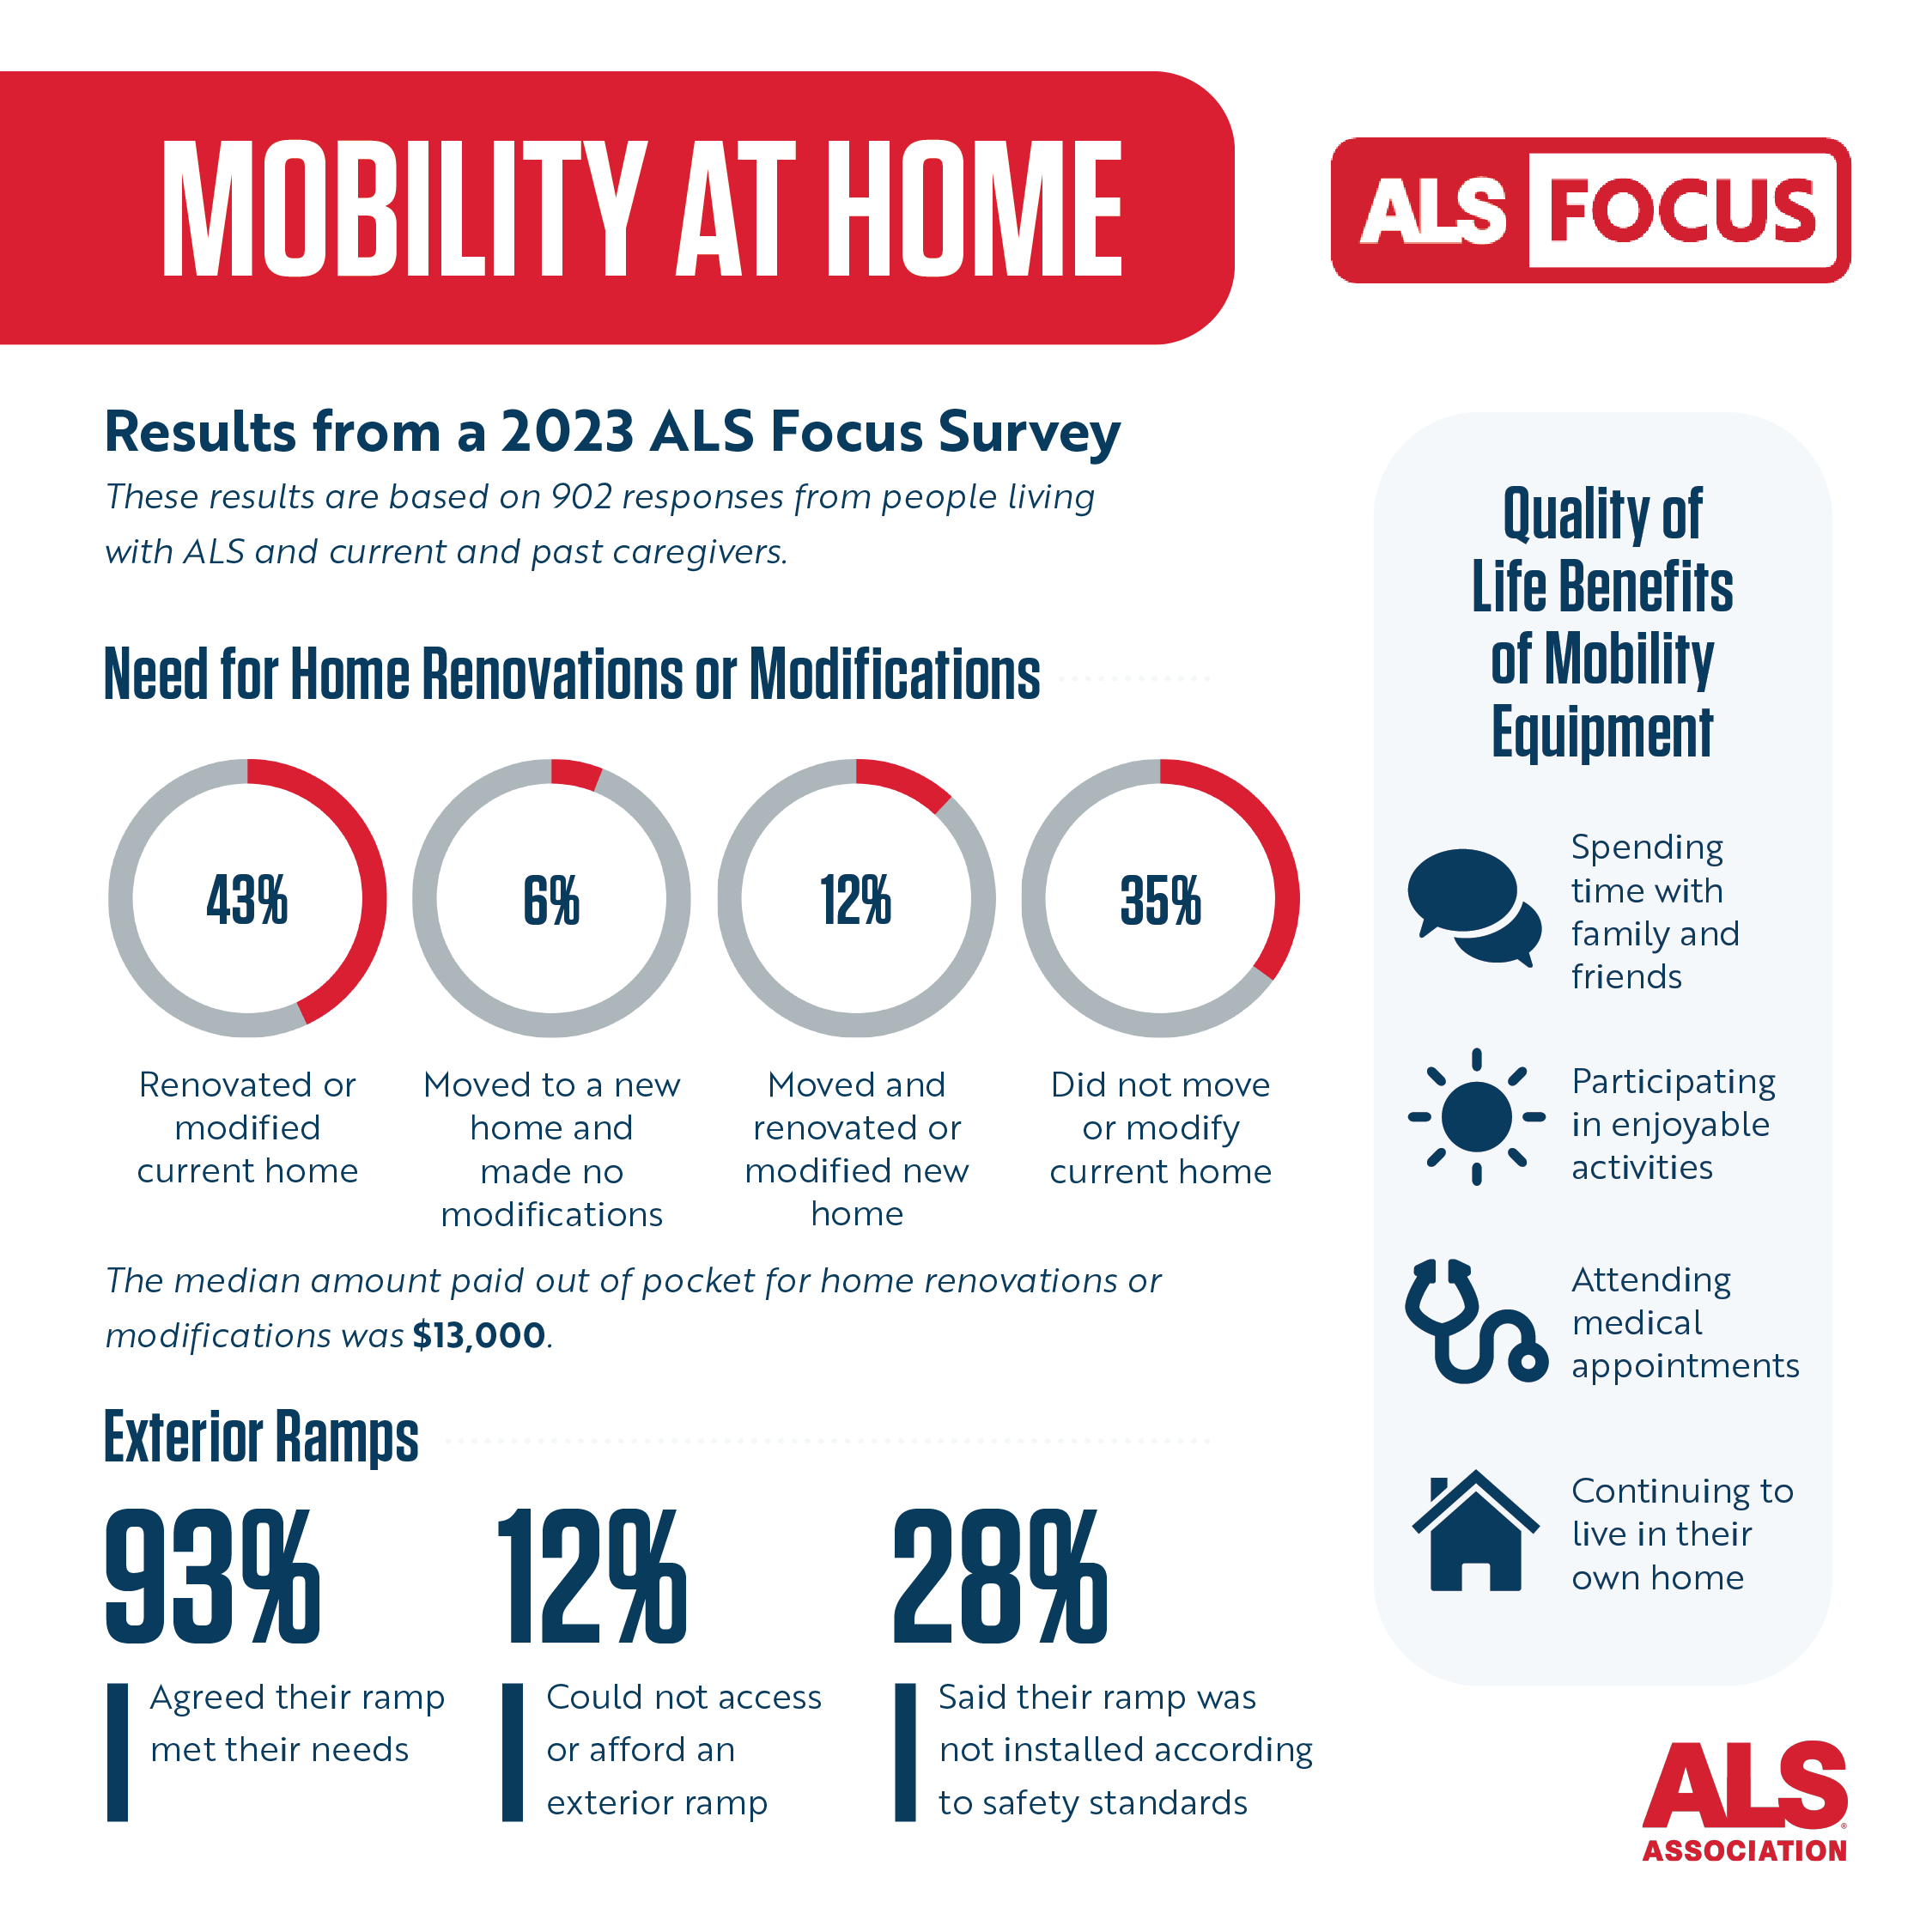 Mobility at Home - ALS Focus Survey Results